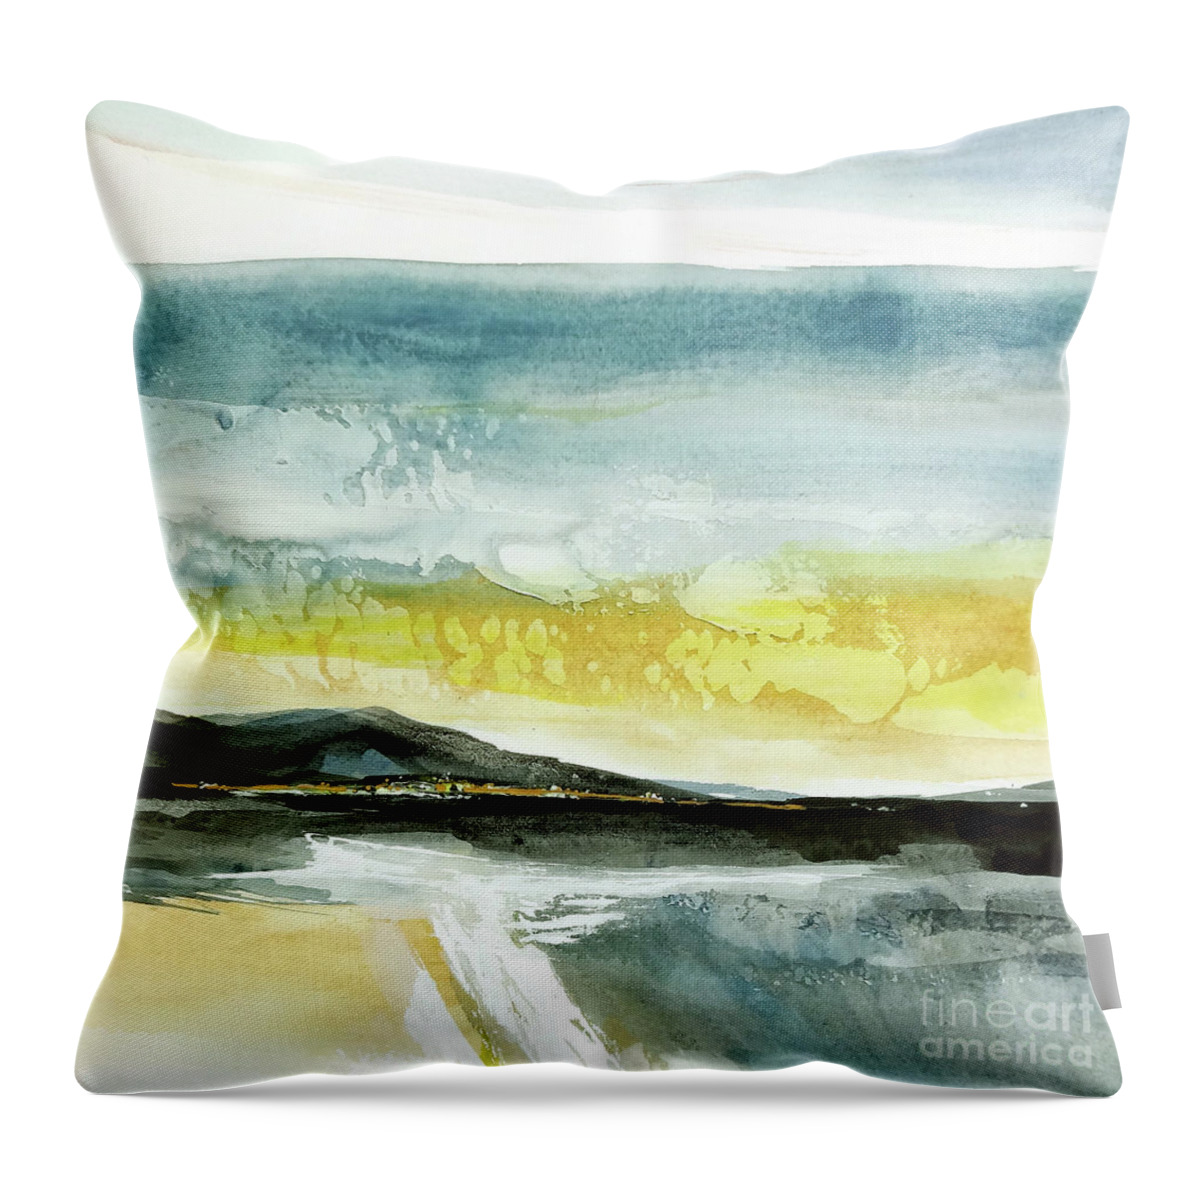 Original Watercolors Throw Pillow featuring the painting Distant City 1 by Chris Paschke